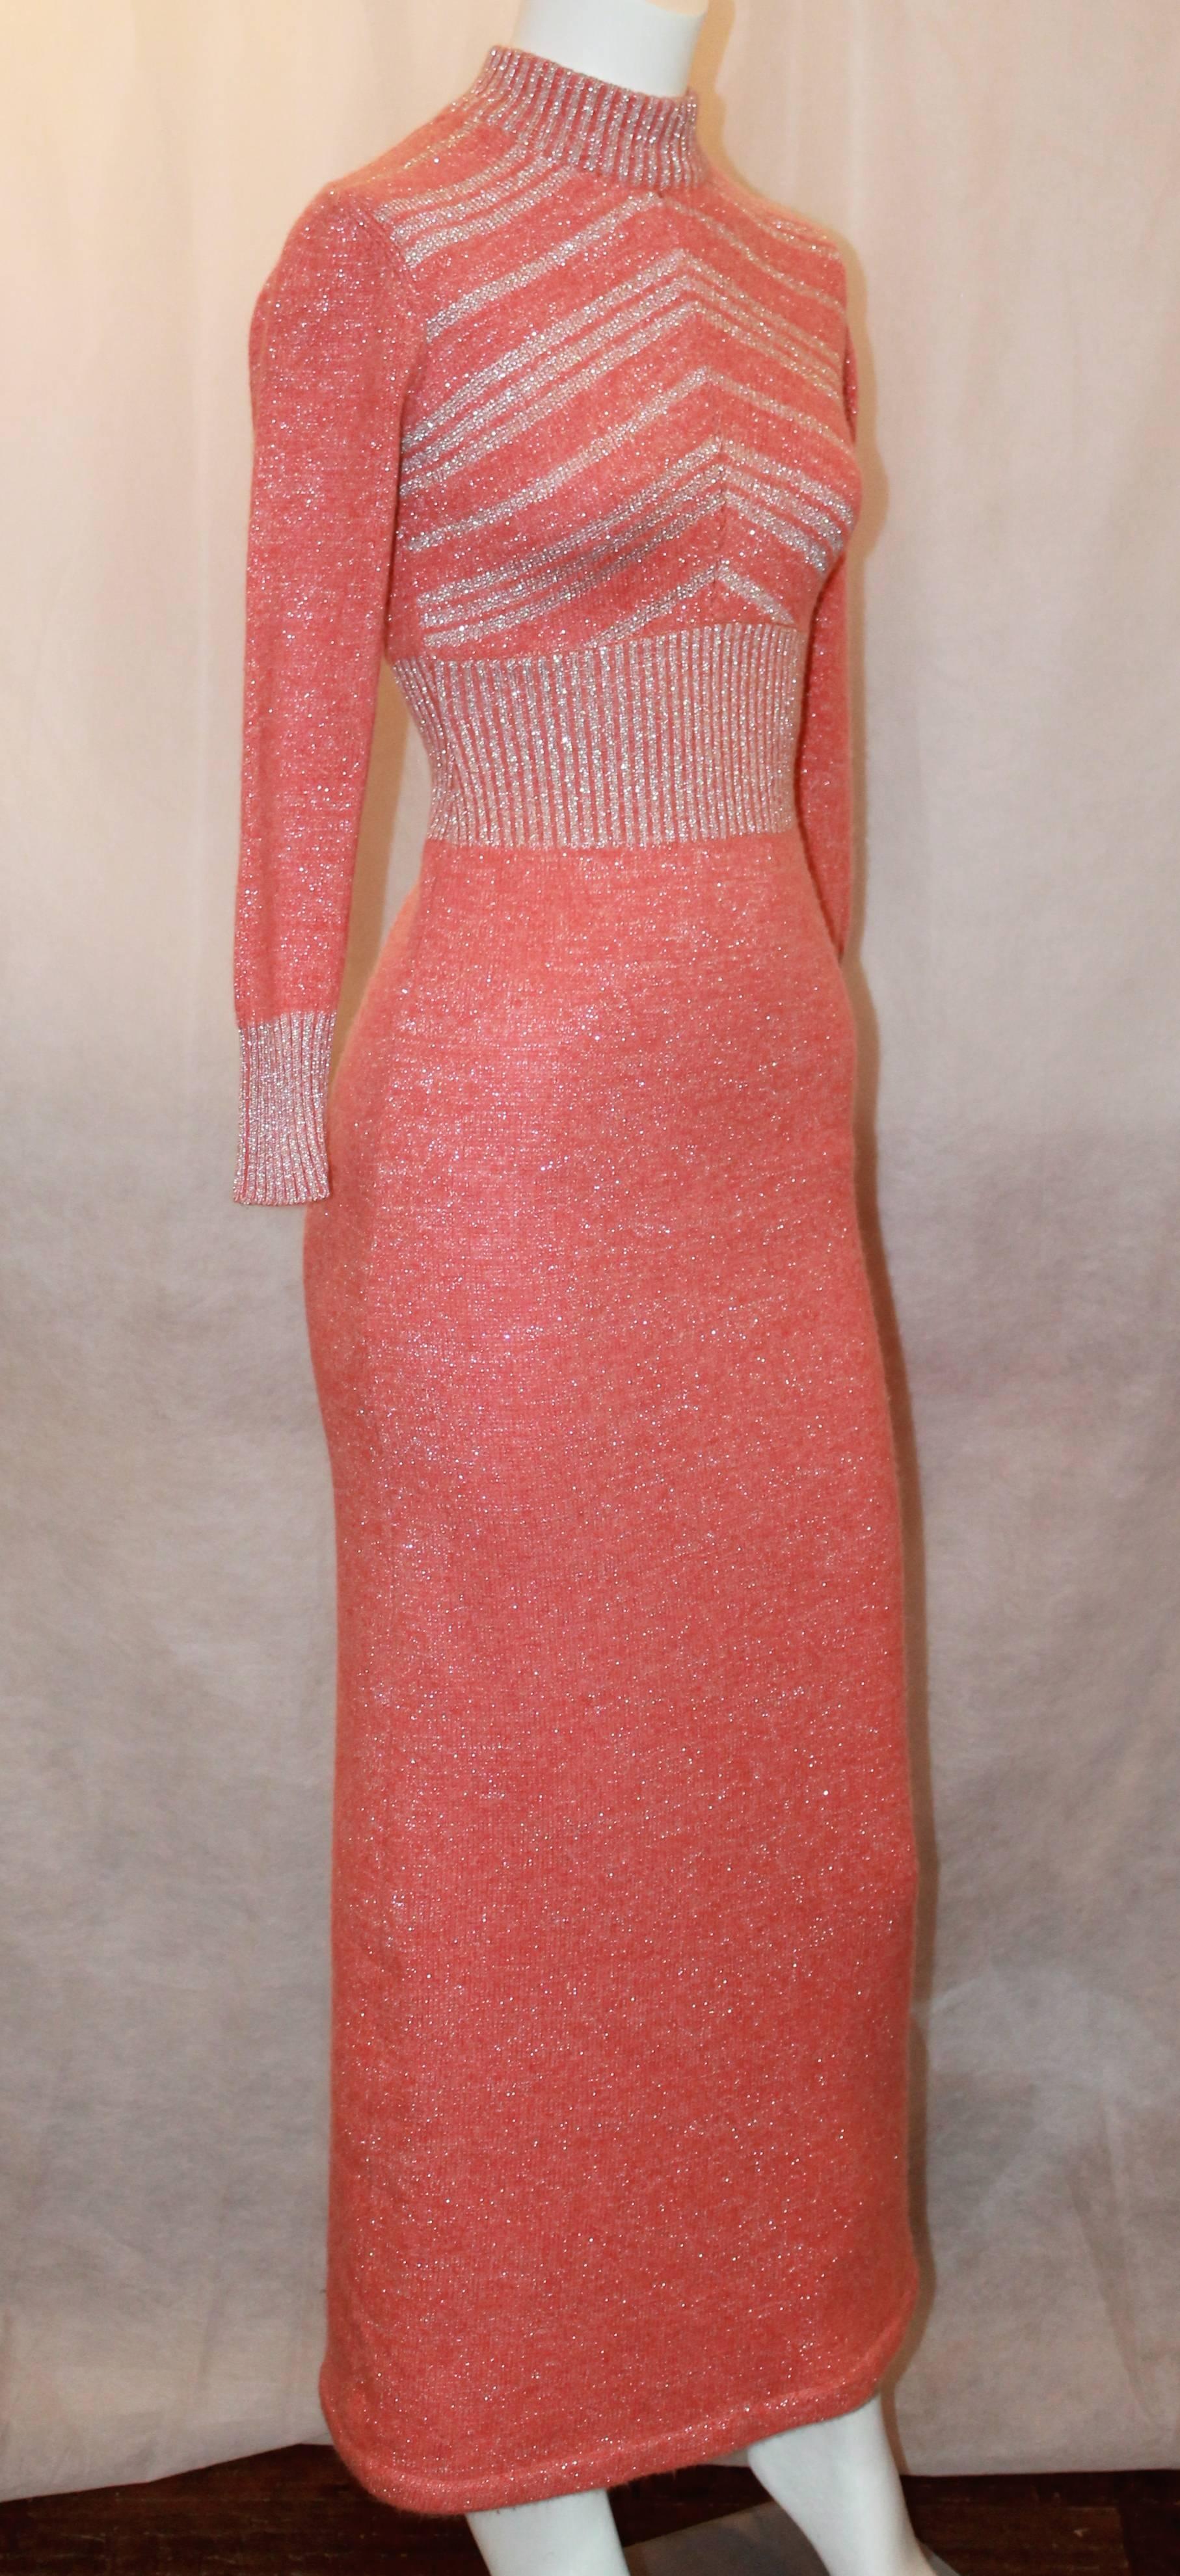 Vintage Coral Wool Long Sleeved Maxi Dress w/ Silver Metallic Stitching - 1970's.  This lovely dress in in excellent vintage condition.  It features an upward chevron design on the bust area in the front, a high roundneck, silver metallic stitching,